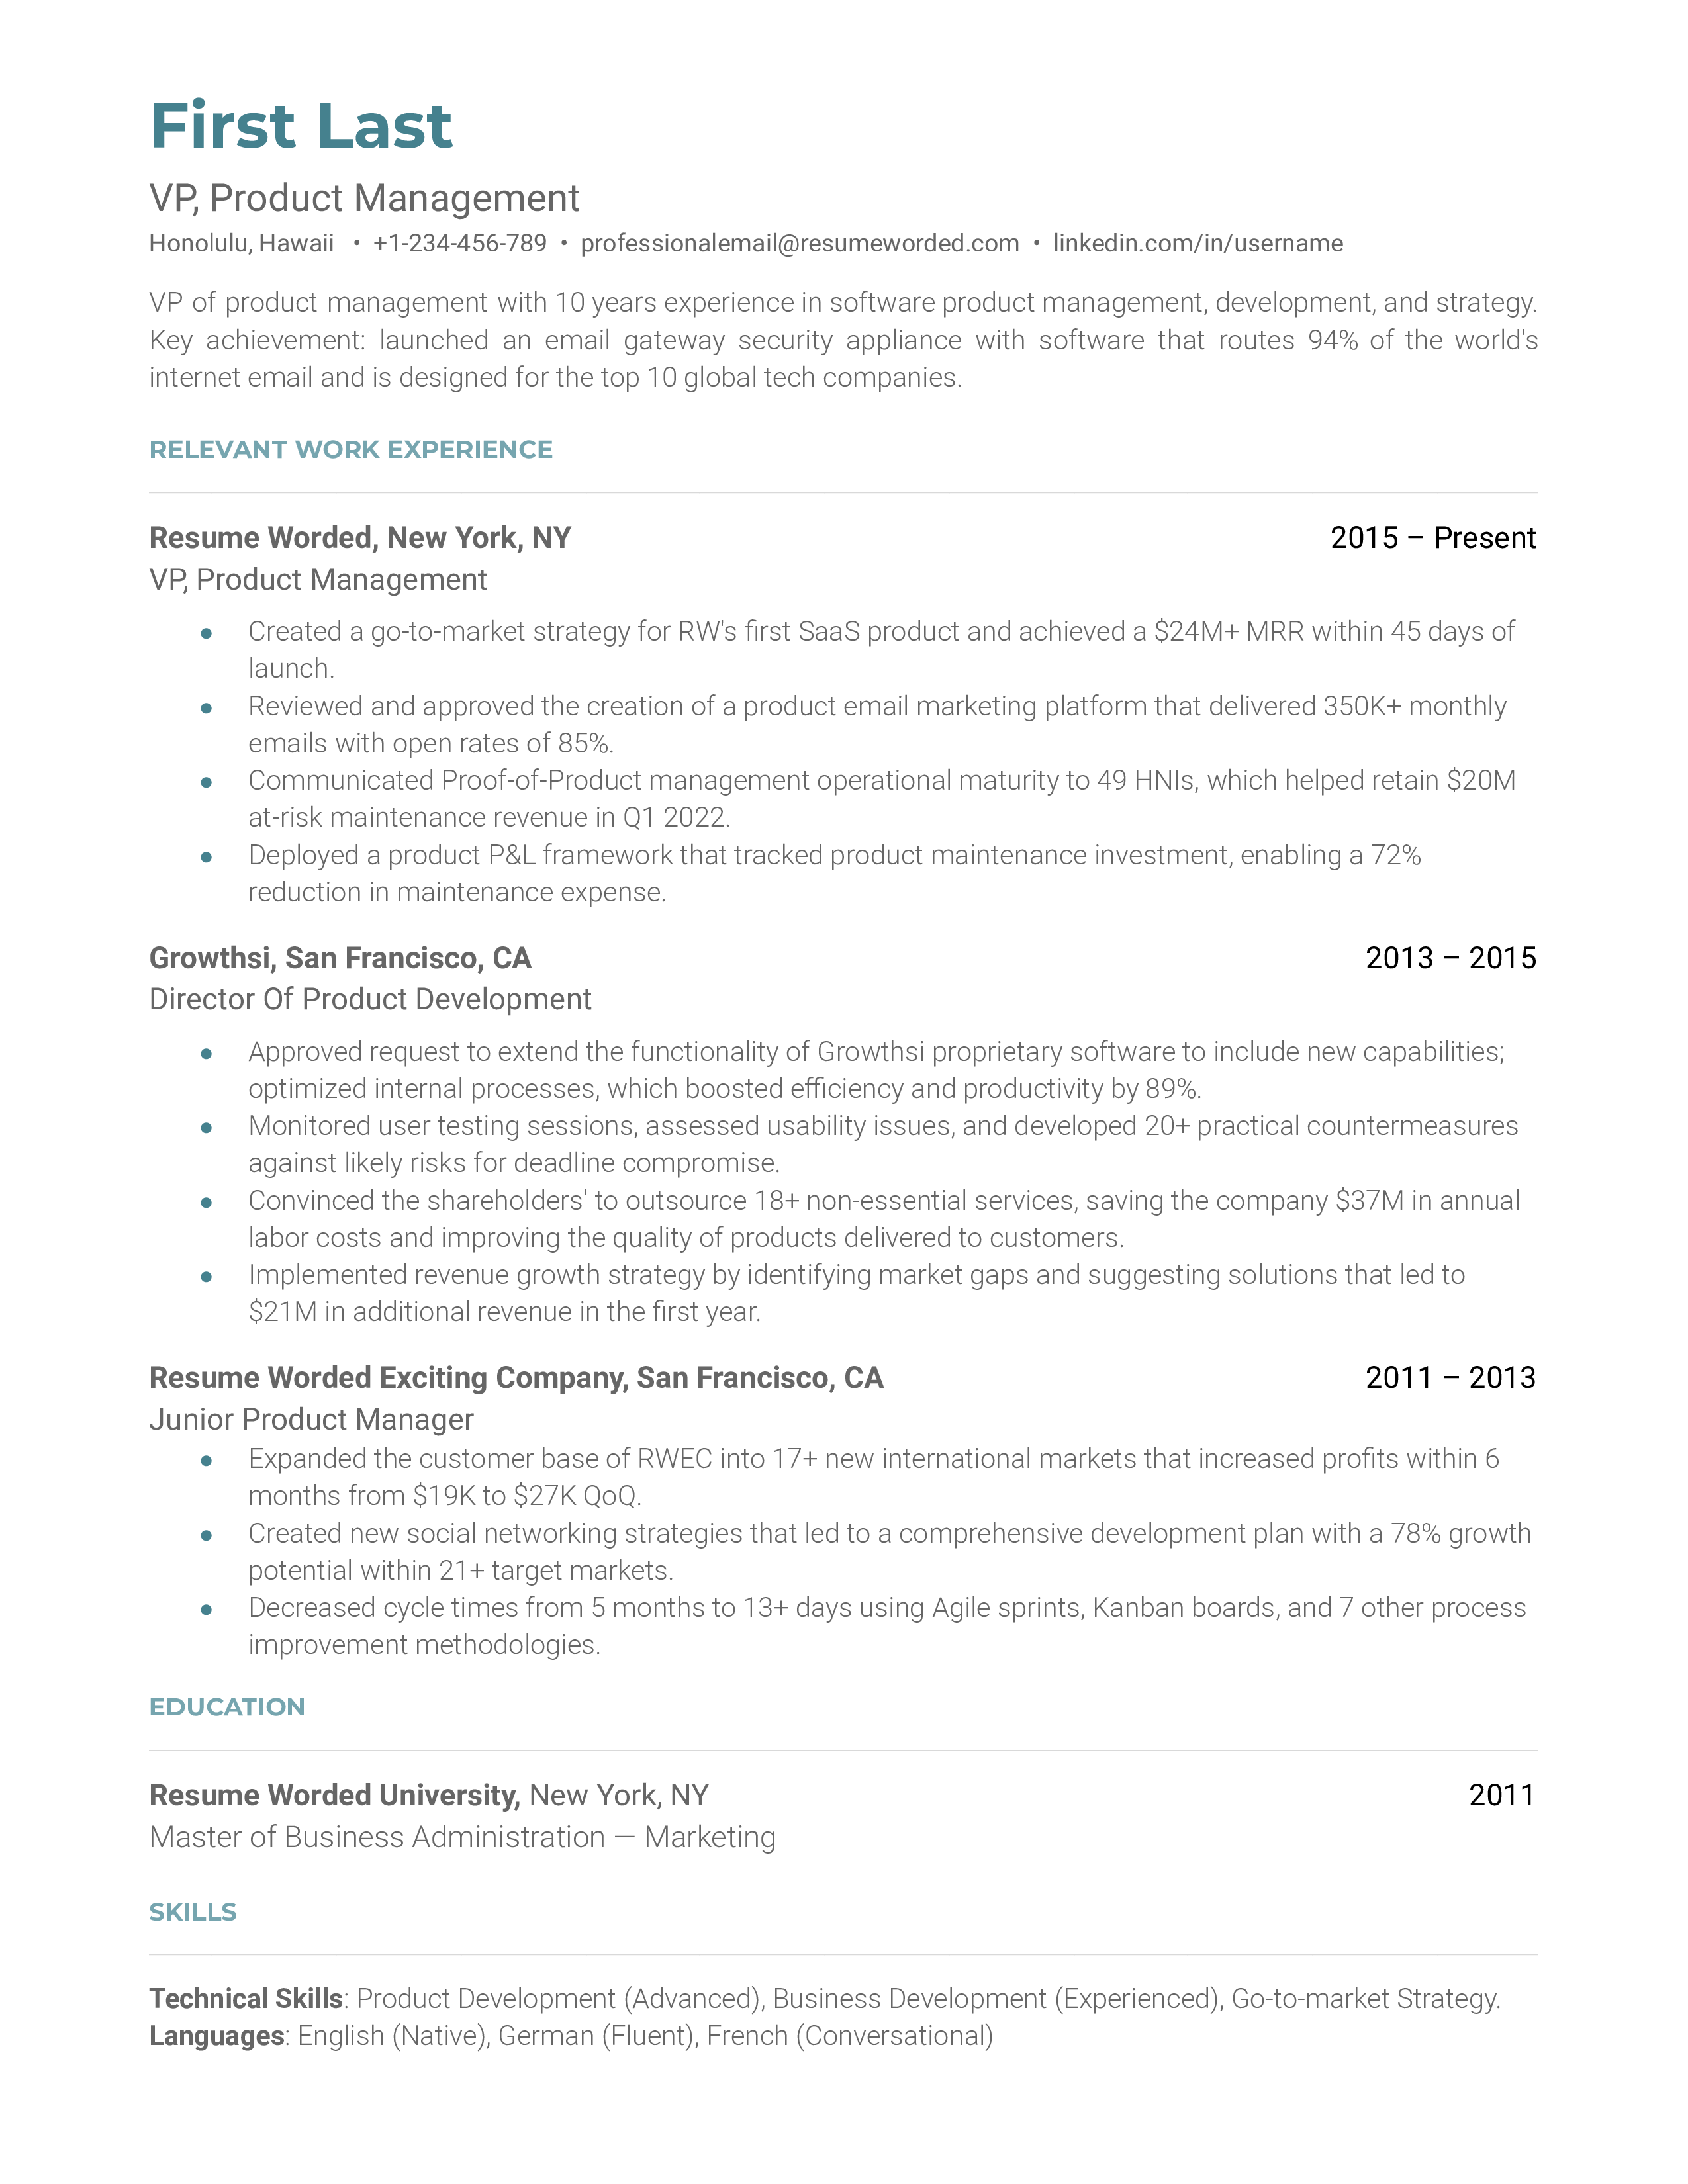 A VP of product management resume sample that highlights the candidate’s key achievements and career progressions.